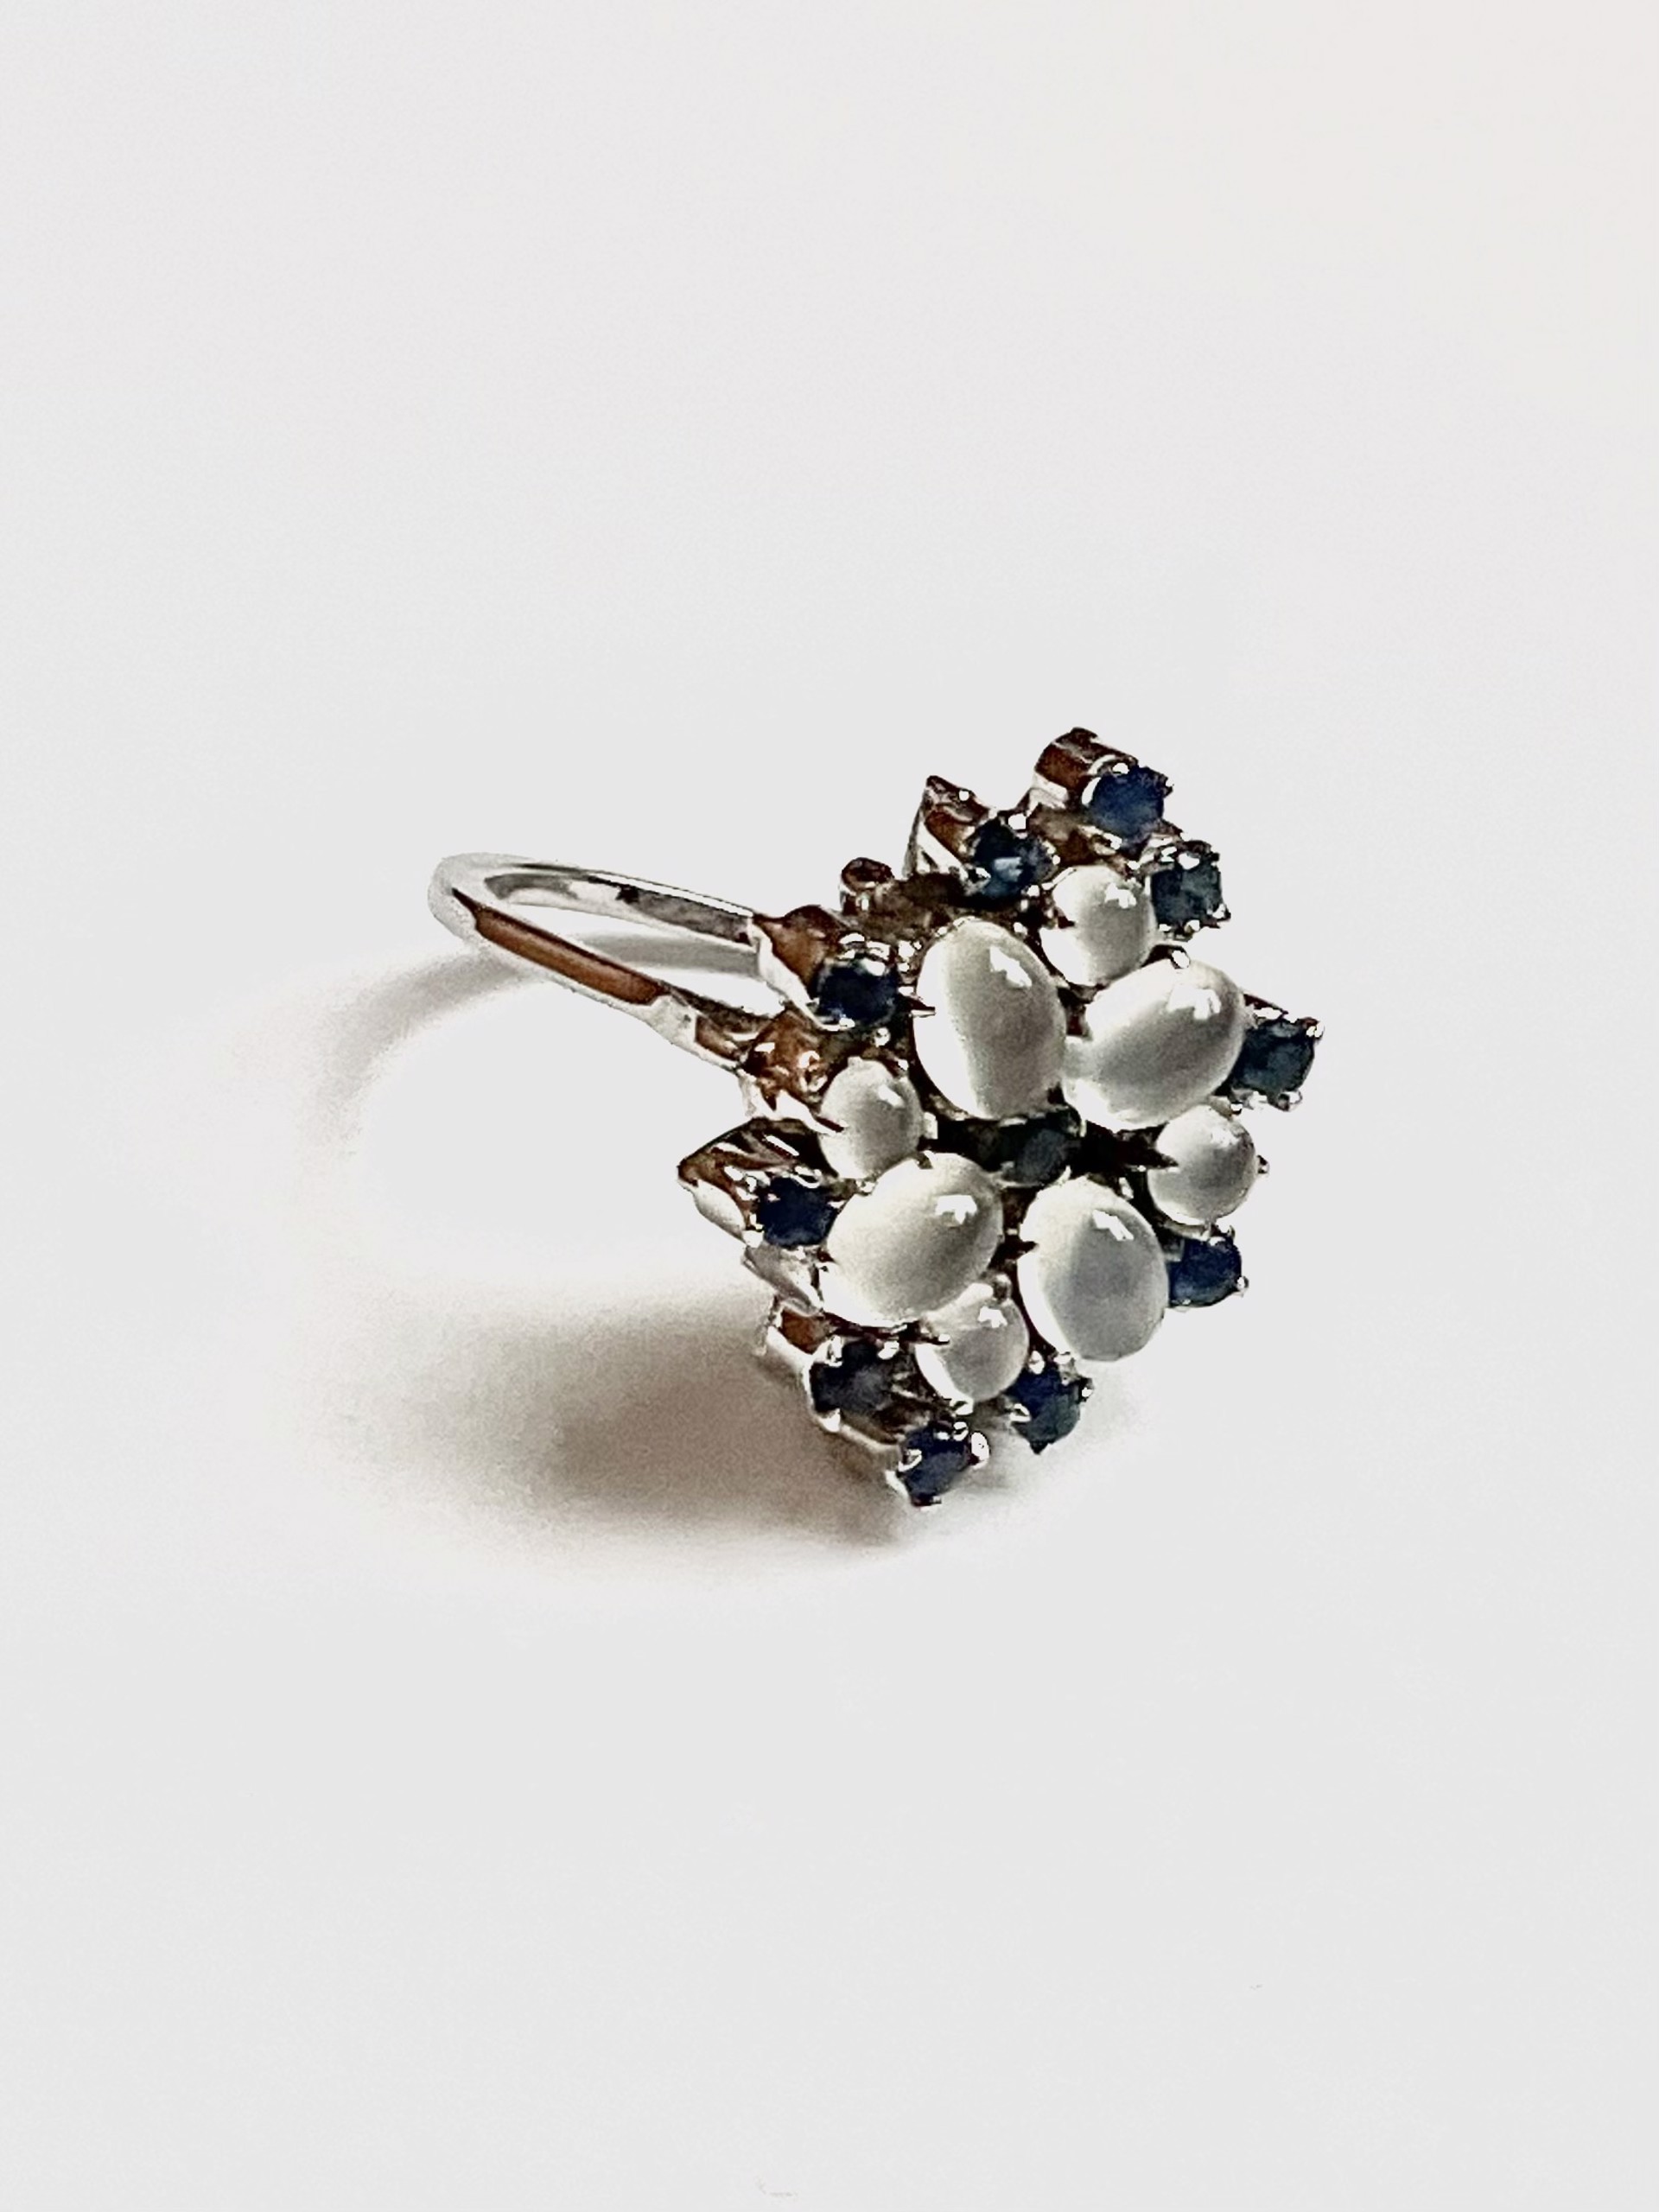 Moonstone and Sapphire Ring by J. Catma